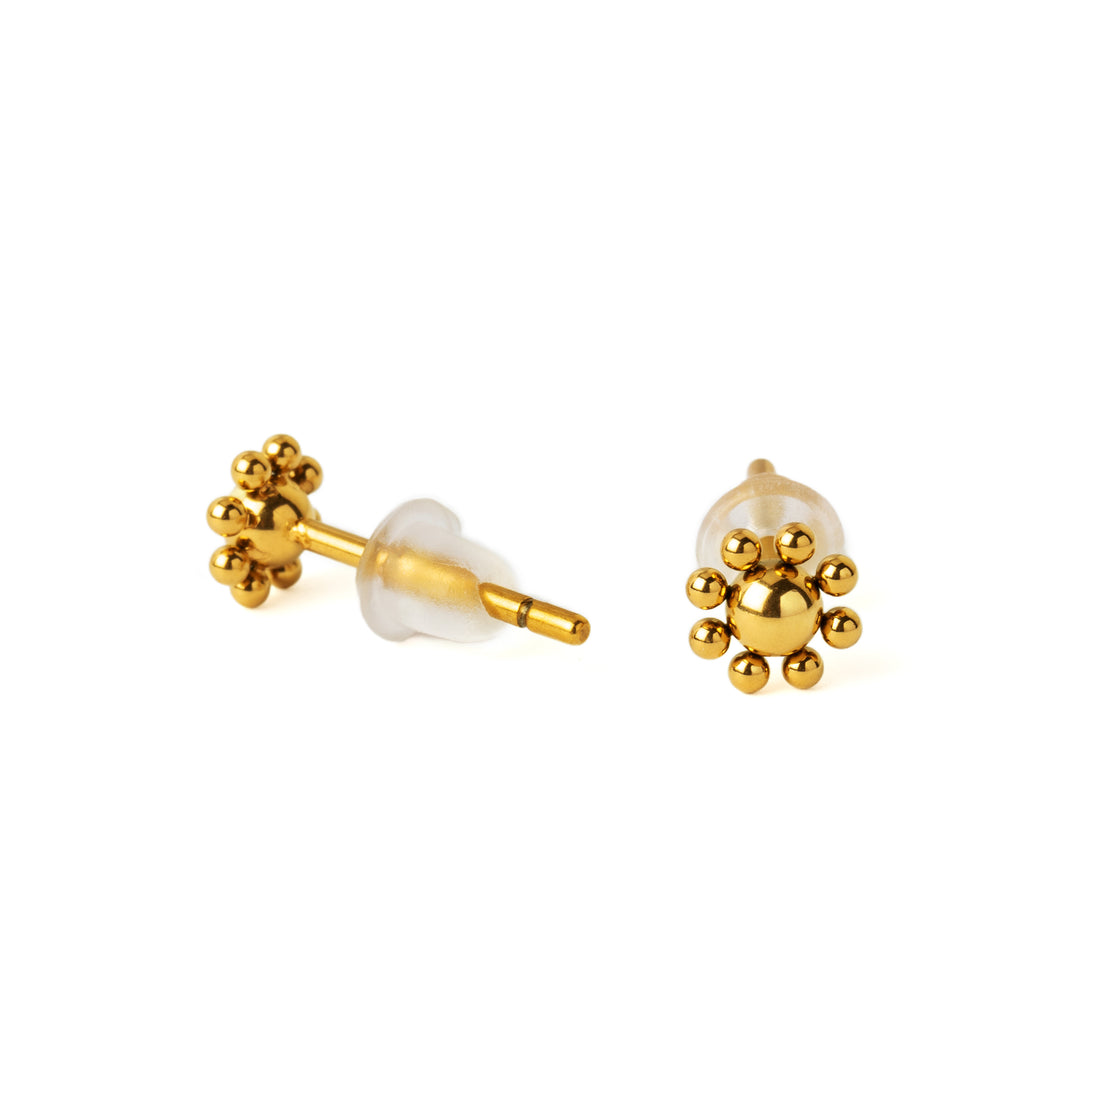 Golden Daisy Ear Studs front and back view